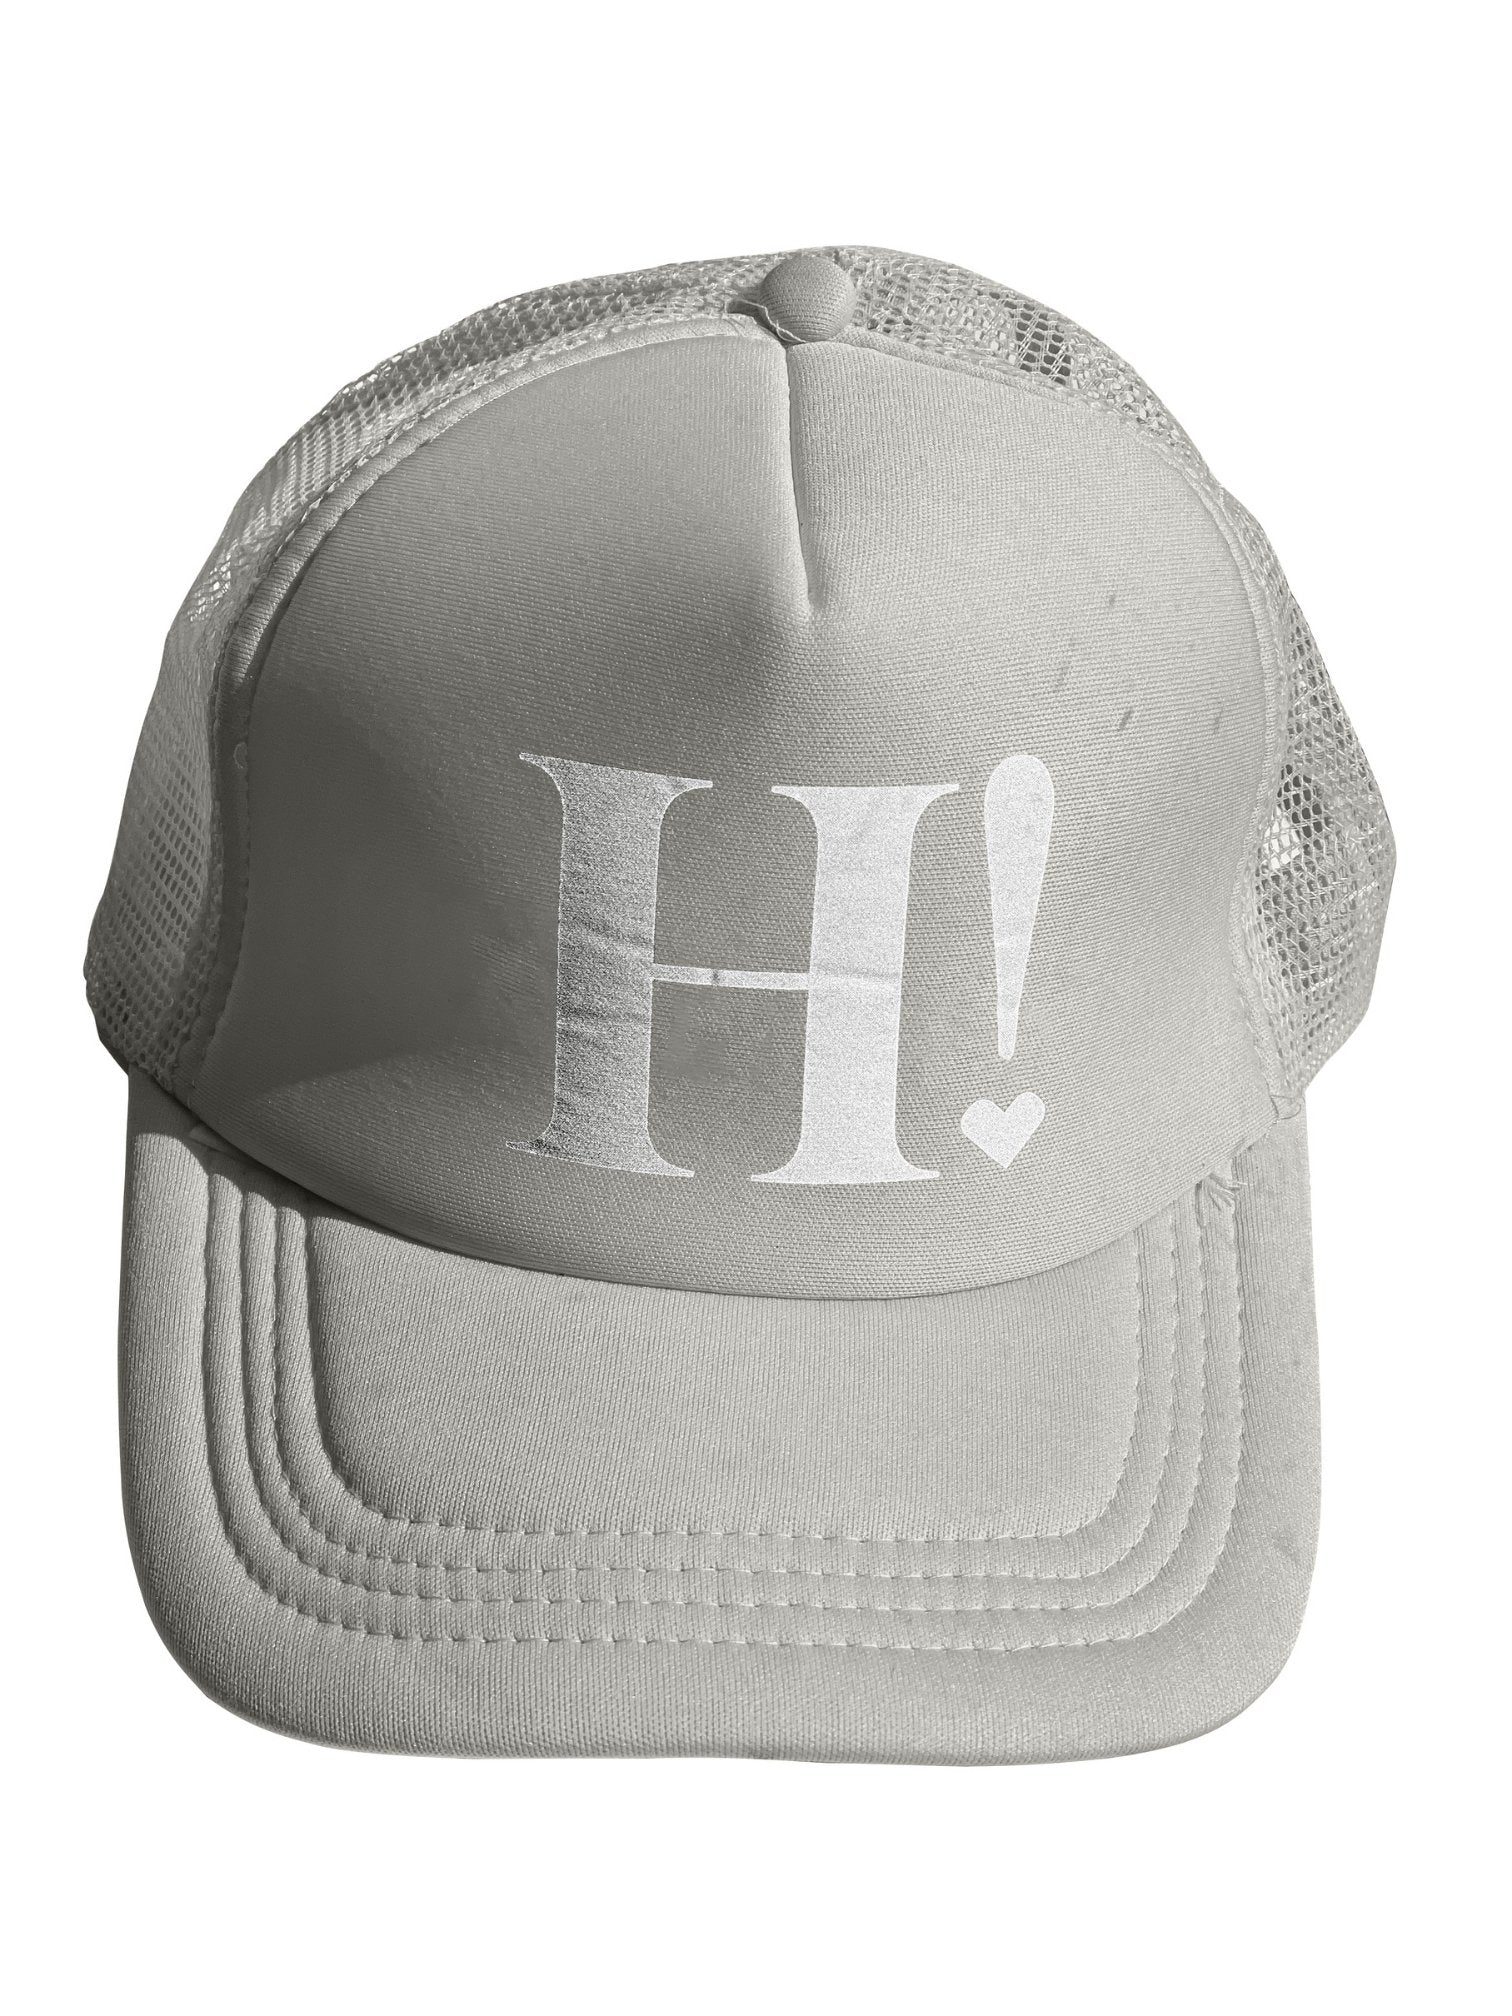 Hat - Silverwood Gray with Silver H!